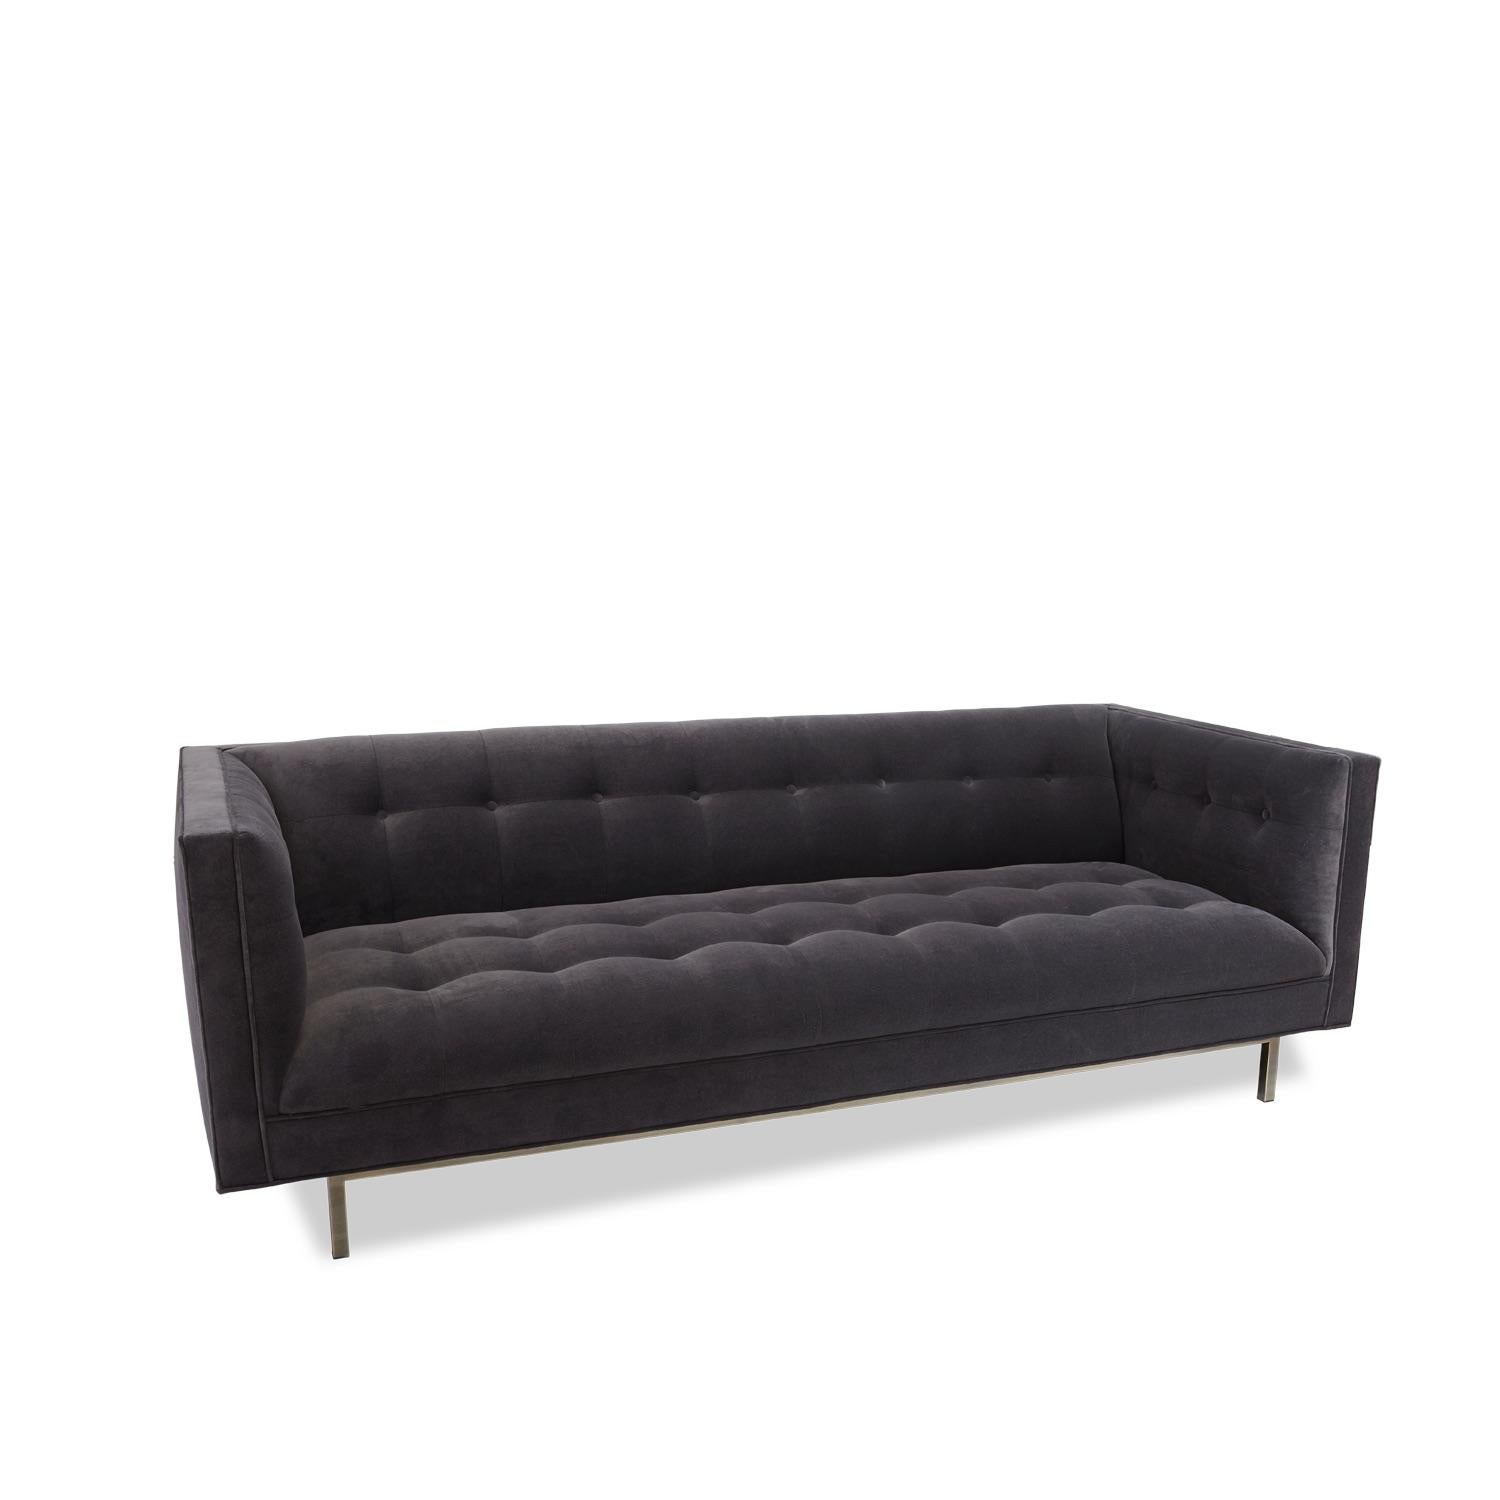 The Trousdale sofa features a tufted body, arms and seat with attached cushions. The recessed square base and legs are made of solid American walnut or white oak. Shown here in velvet with an antiqued brass base

The Lawson-Fenning Collection is